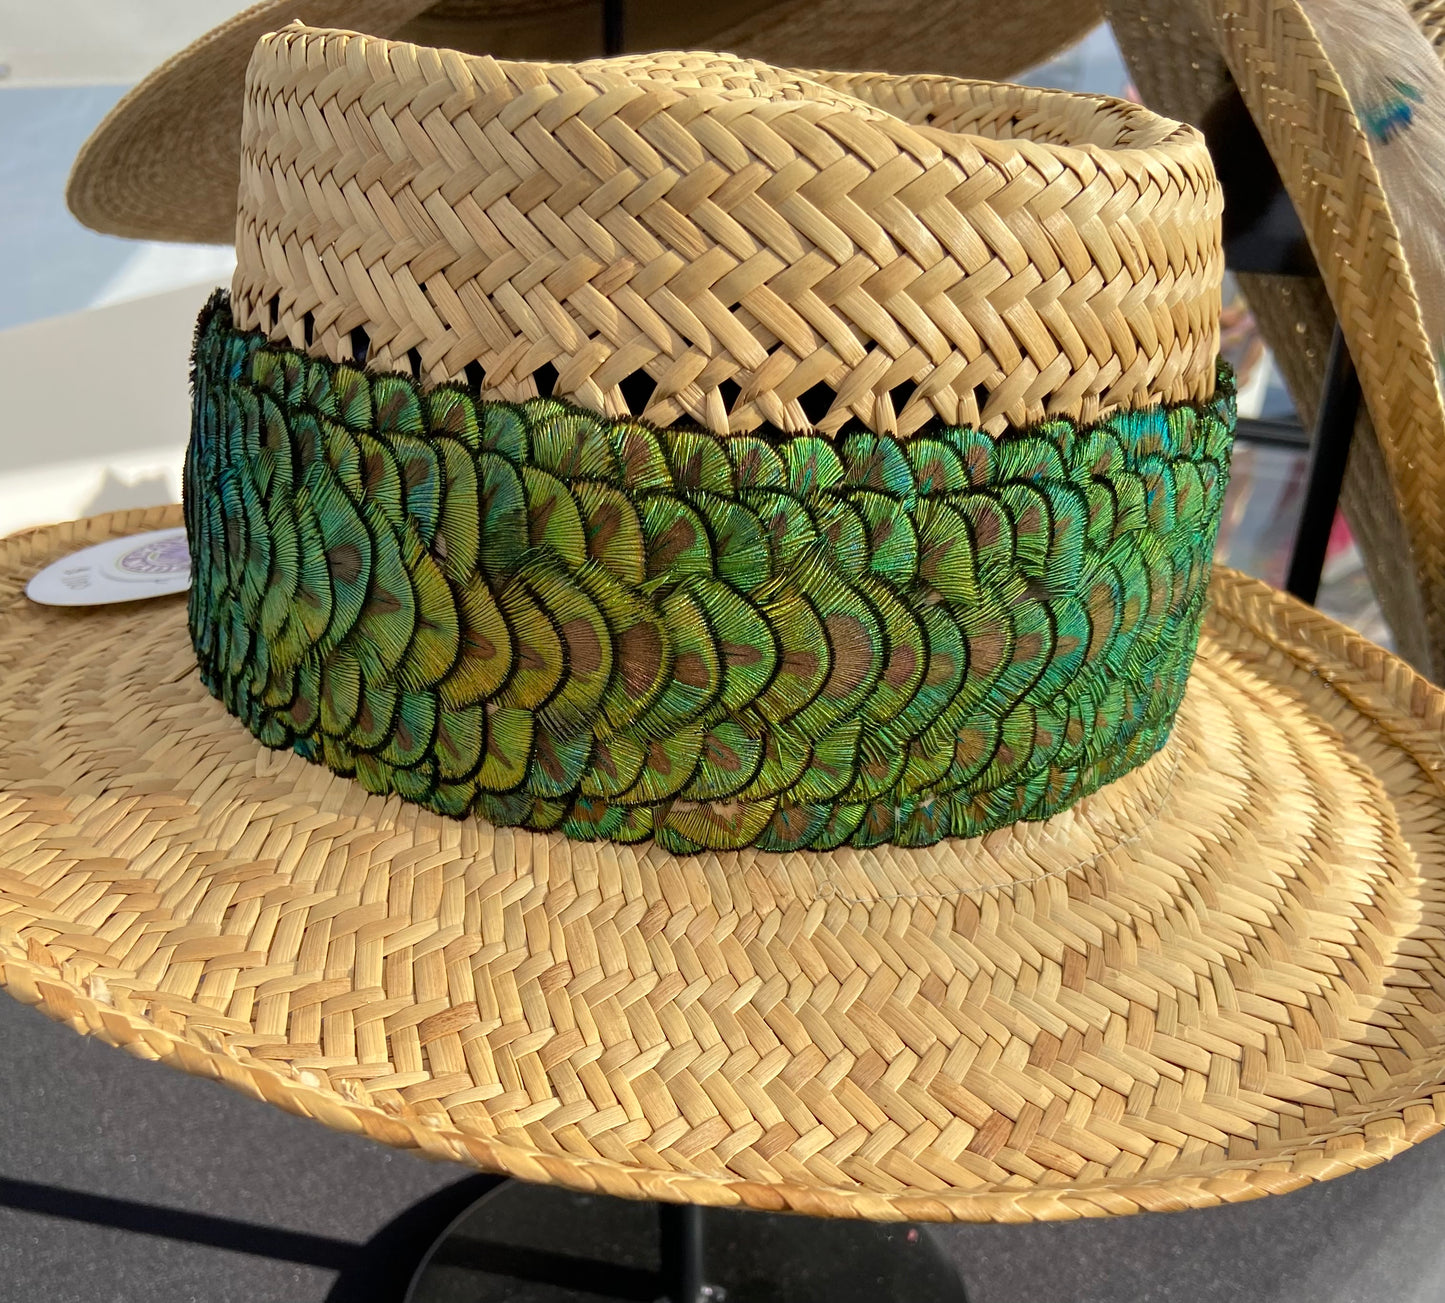 5-Row Golden Iridescent Peacock Humu Papale (feather hat band)